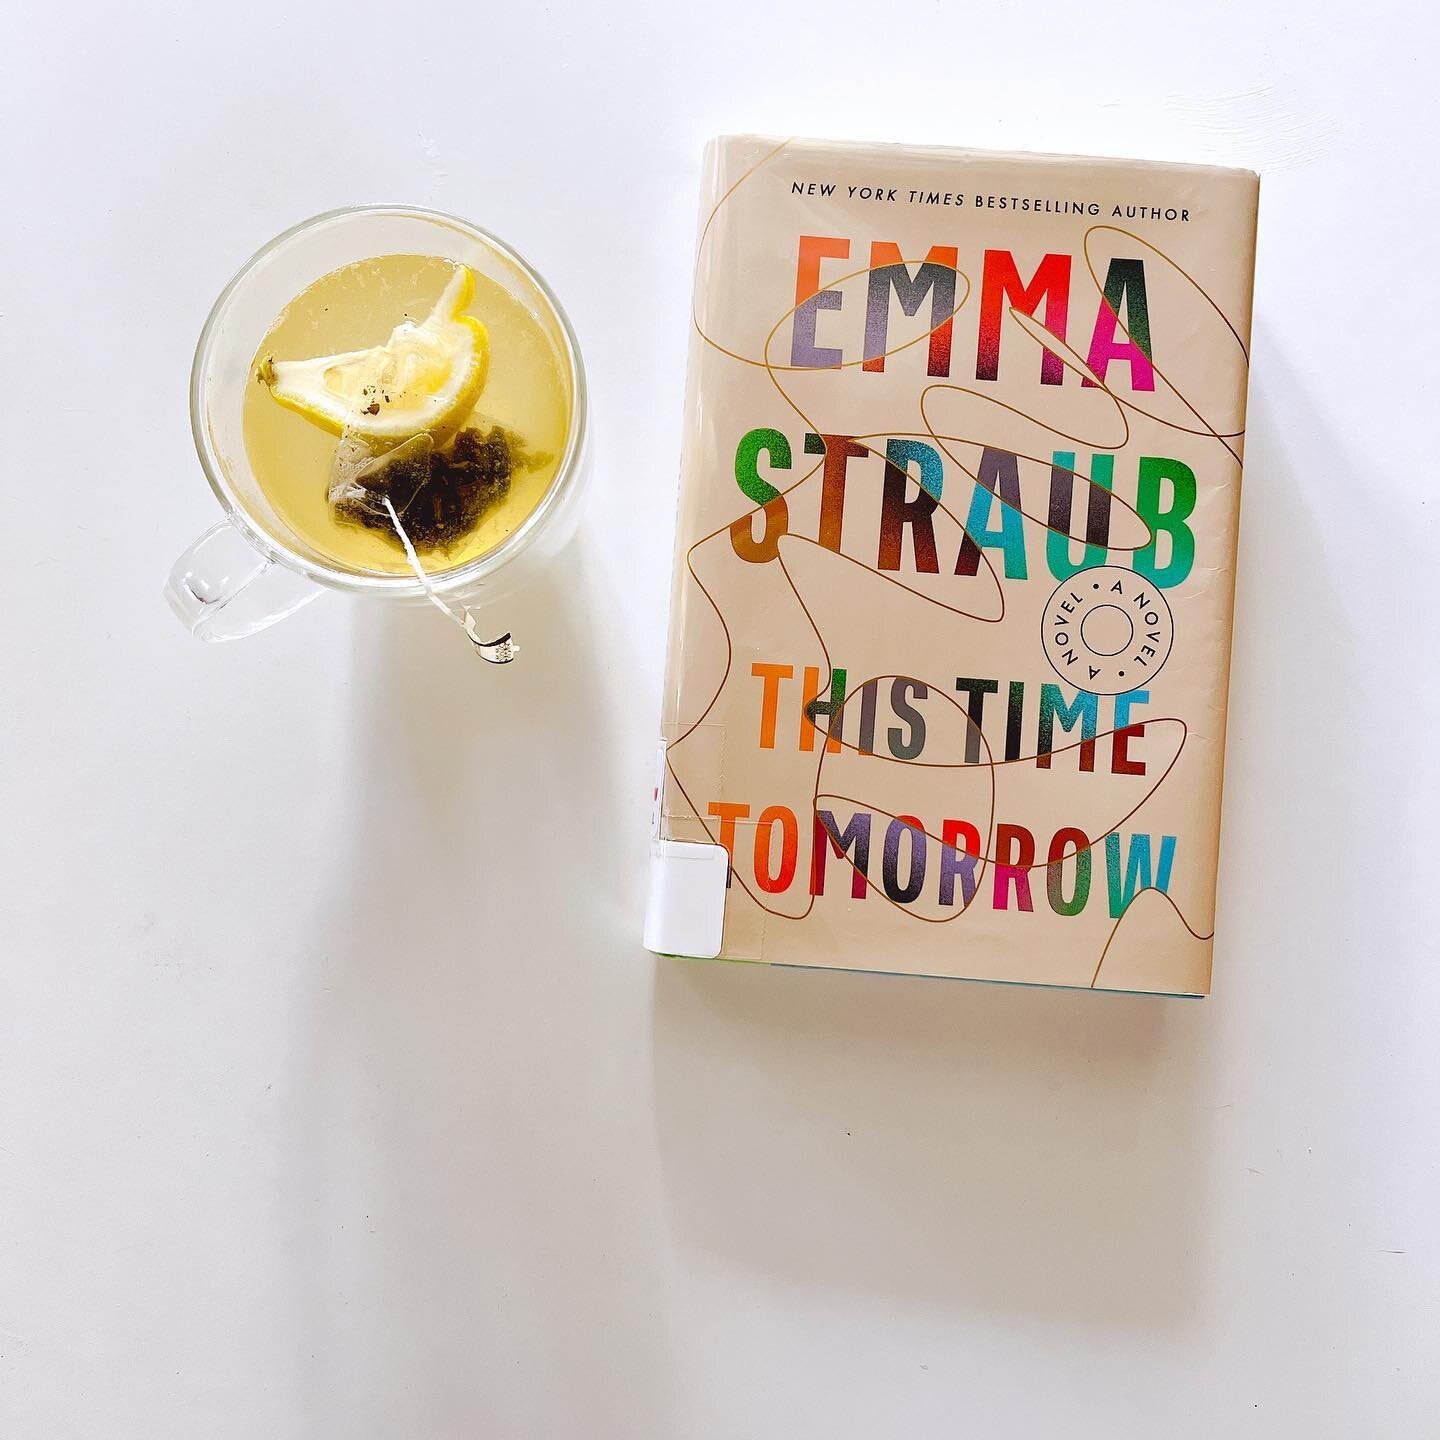 books 29 &amp; 30 for 2022
I really enjoyed This Time Tomorrow. It&rsquo;s been awhile since I&rsquo;ve really gotten into a novel and wanted to read it throughout the day. This book feels like such a love letter to her father, had me tearing up at t